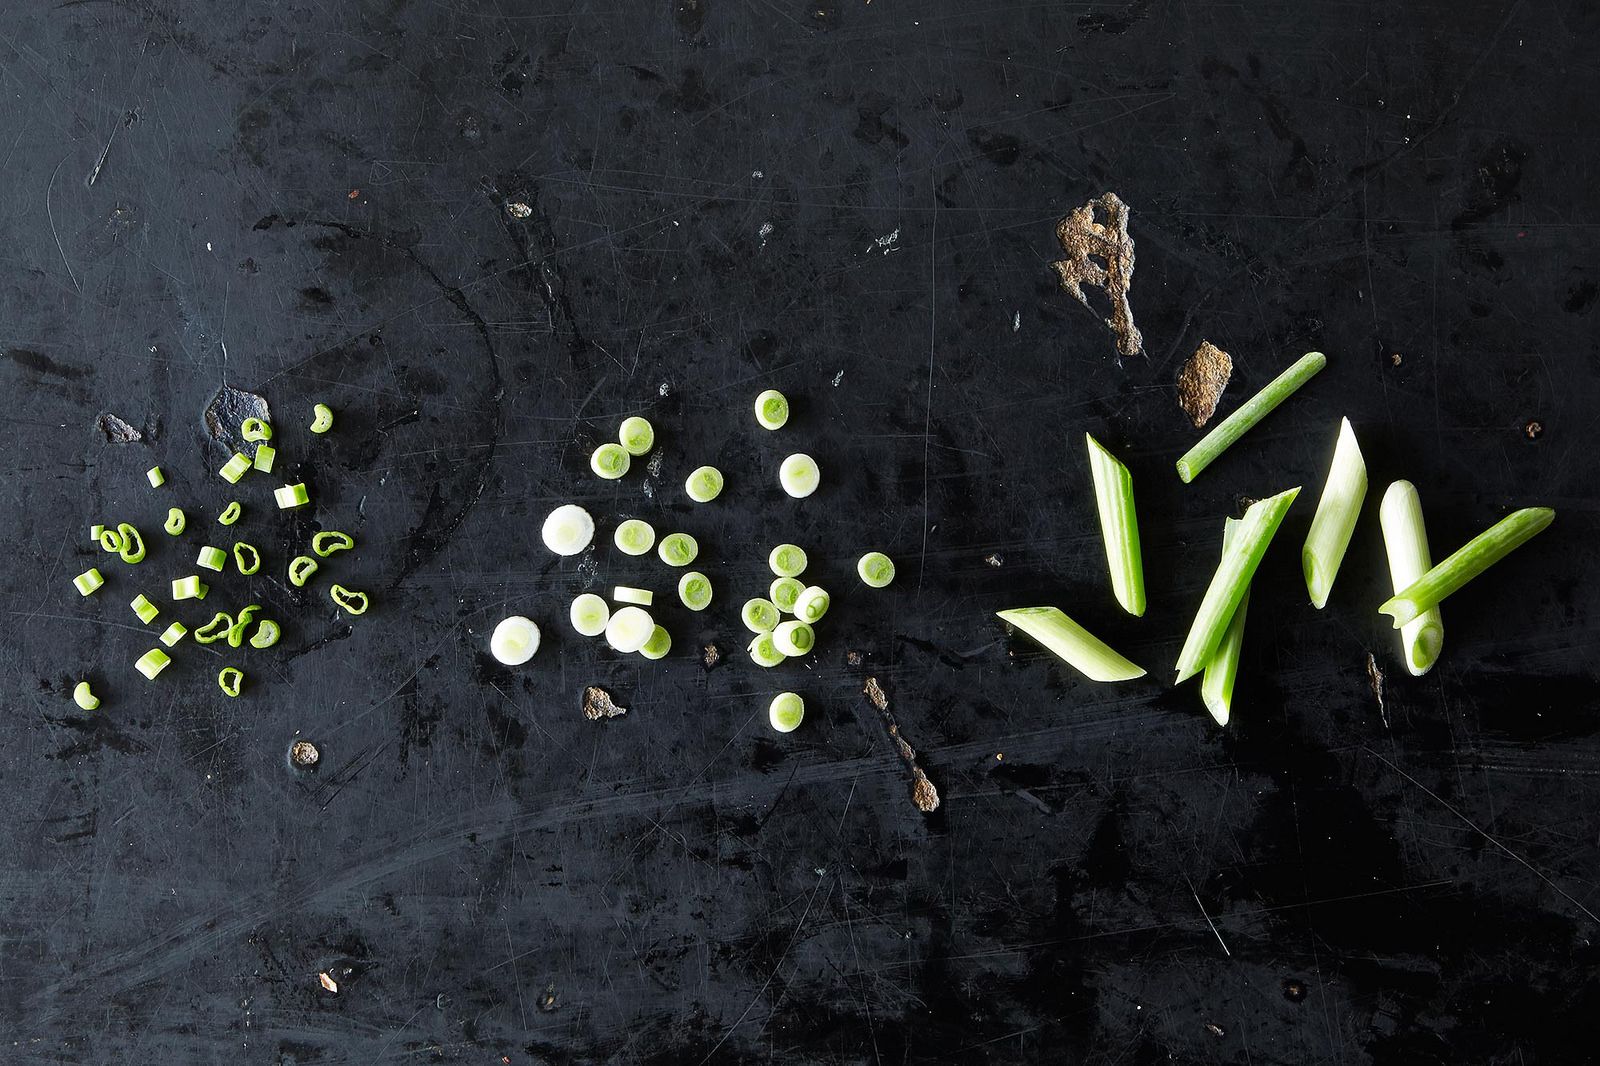 Scallions and 4 Ways to Use Them, from Food52